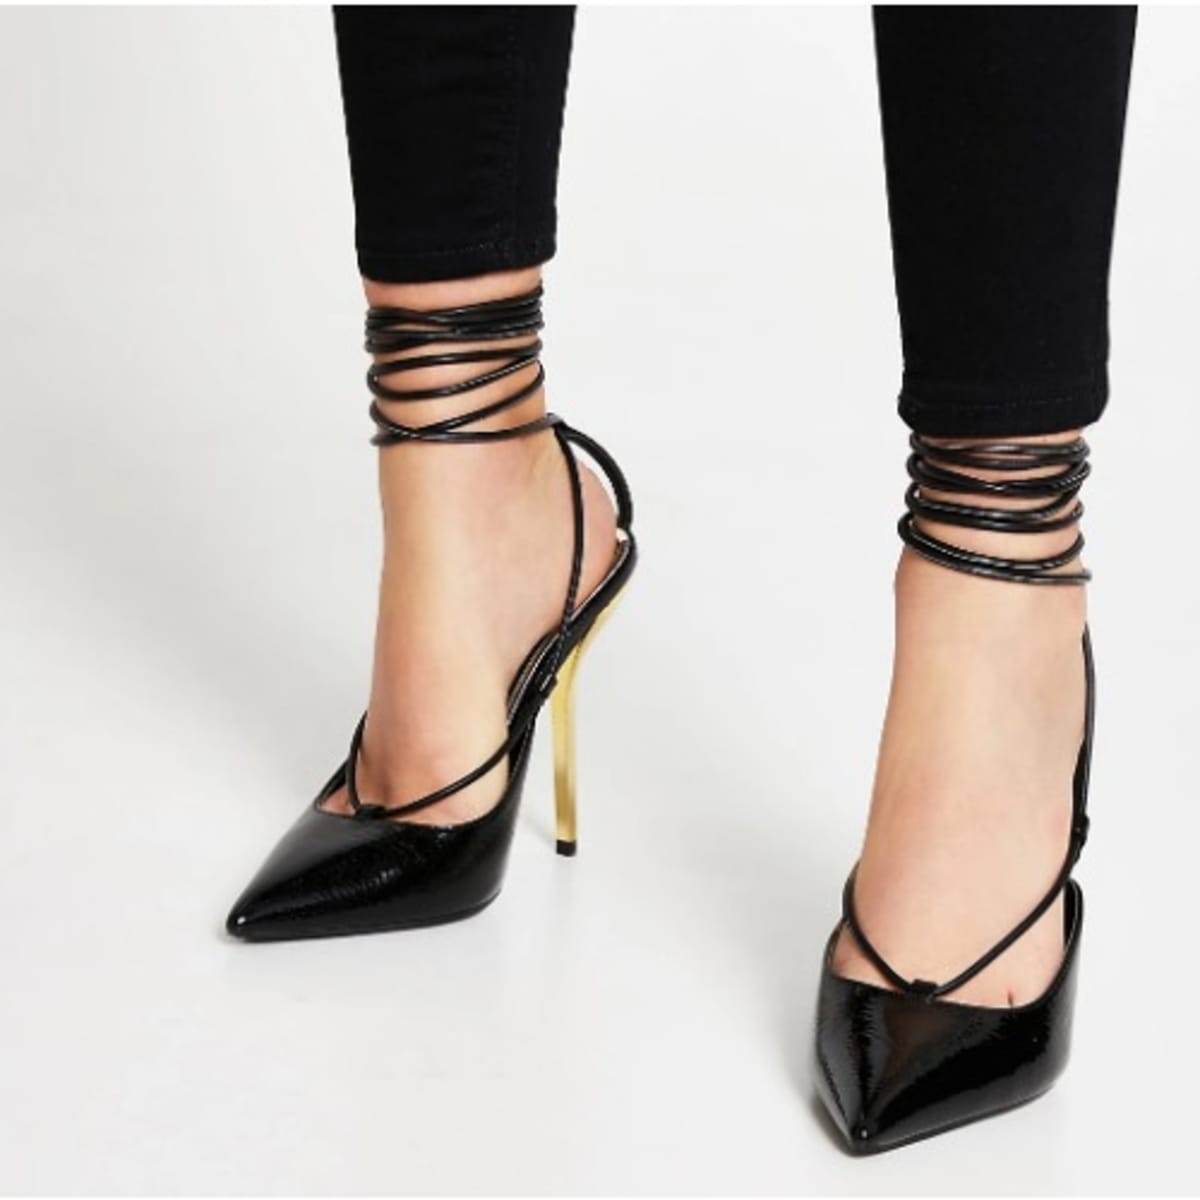 River Island Ankle Tie Court Shoes - Black | Konga Online Shopping